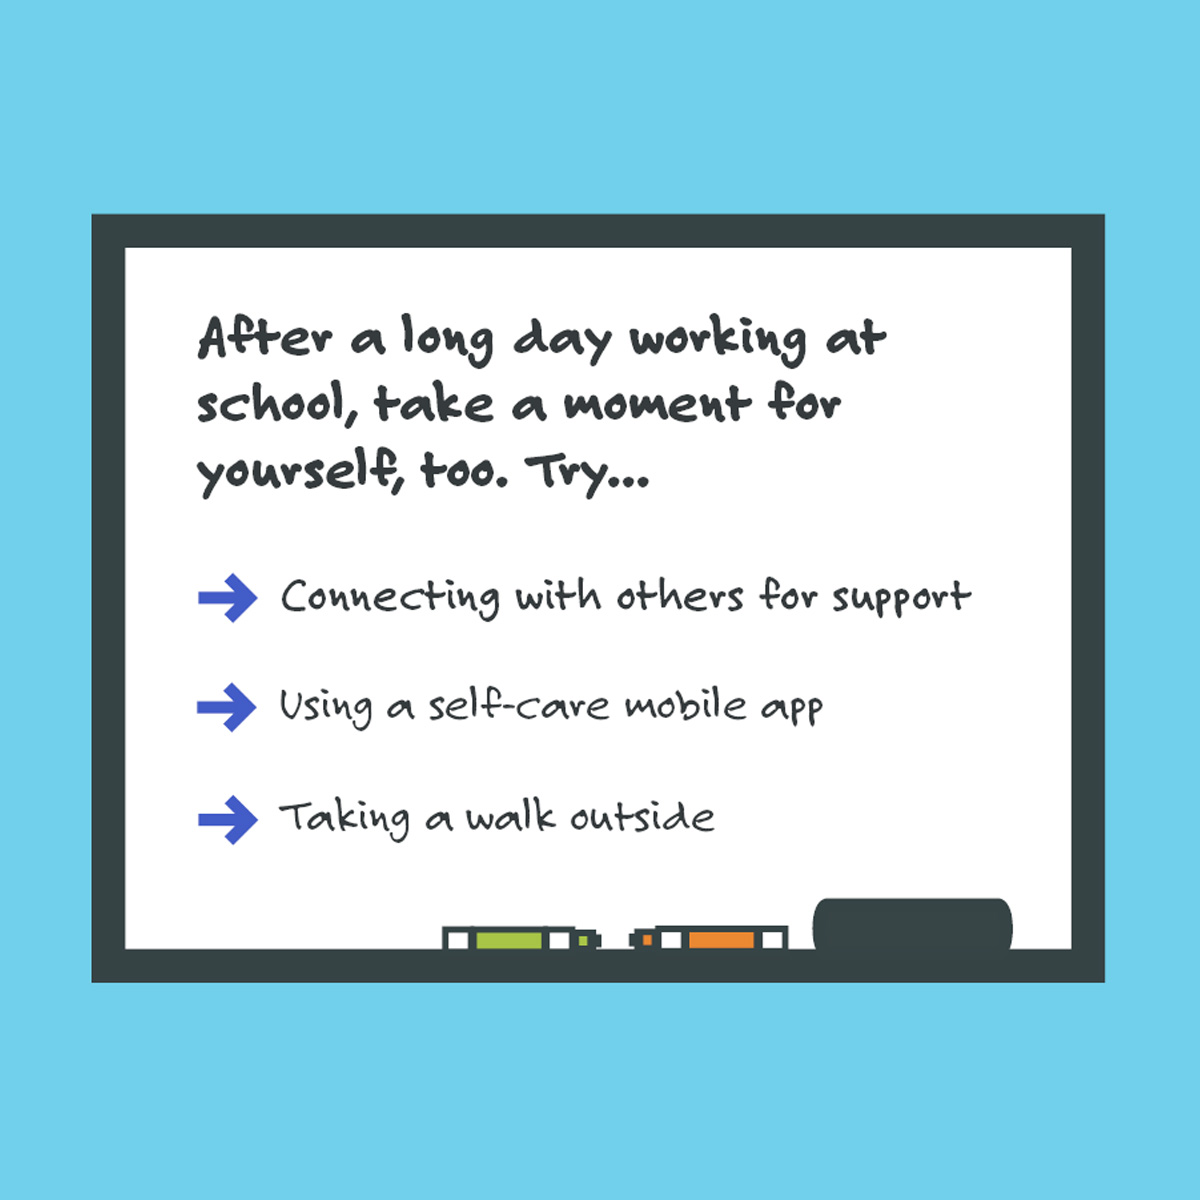 School Leaders: Mindfulness meditation breaks can help support mental health. Get more tips to encourage school staff to get involved in a School Employee Wellness program during #MentalHealthAwarenessMonth. bit.ly/3oM9S1b